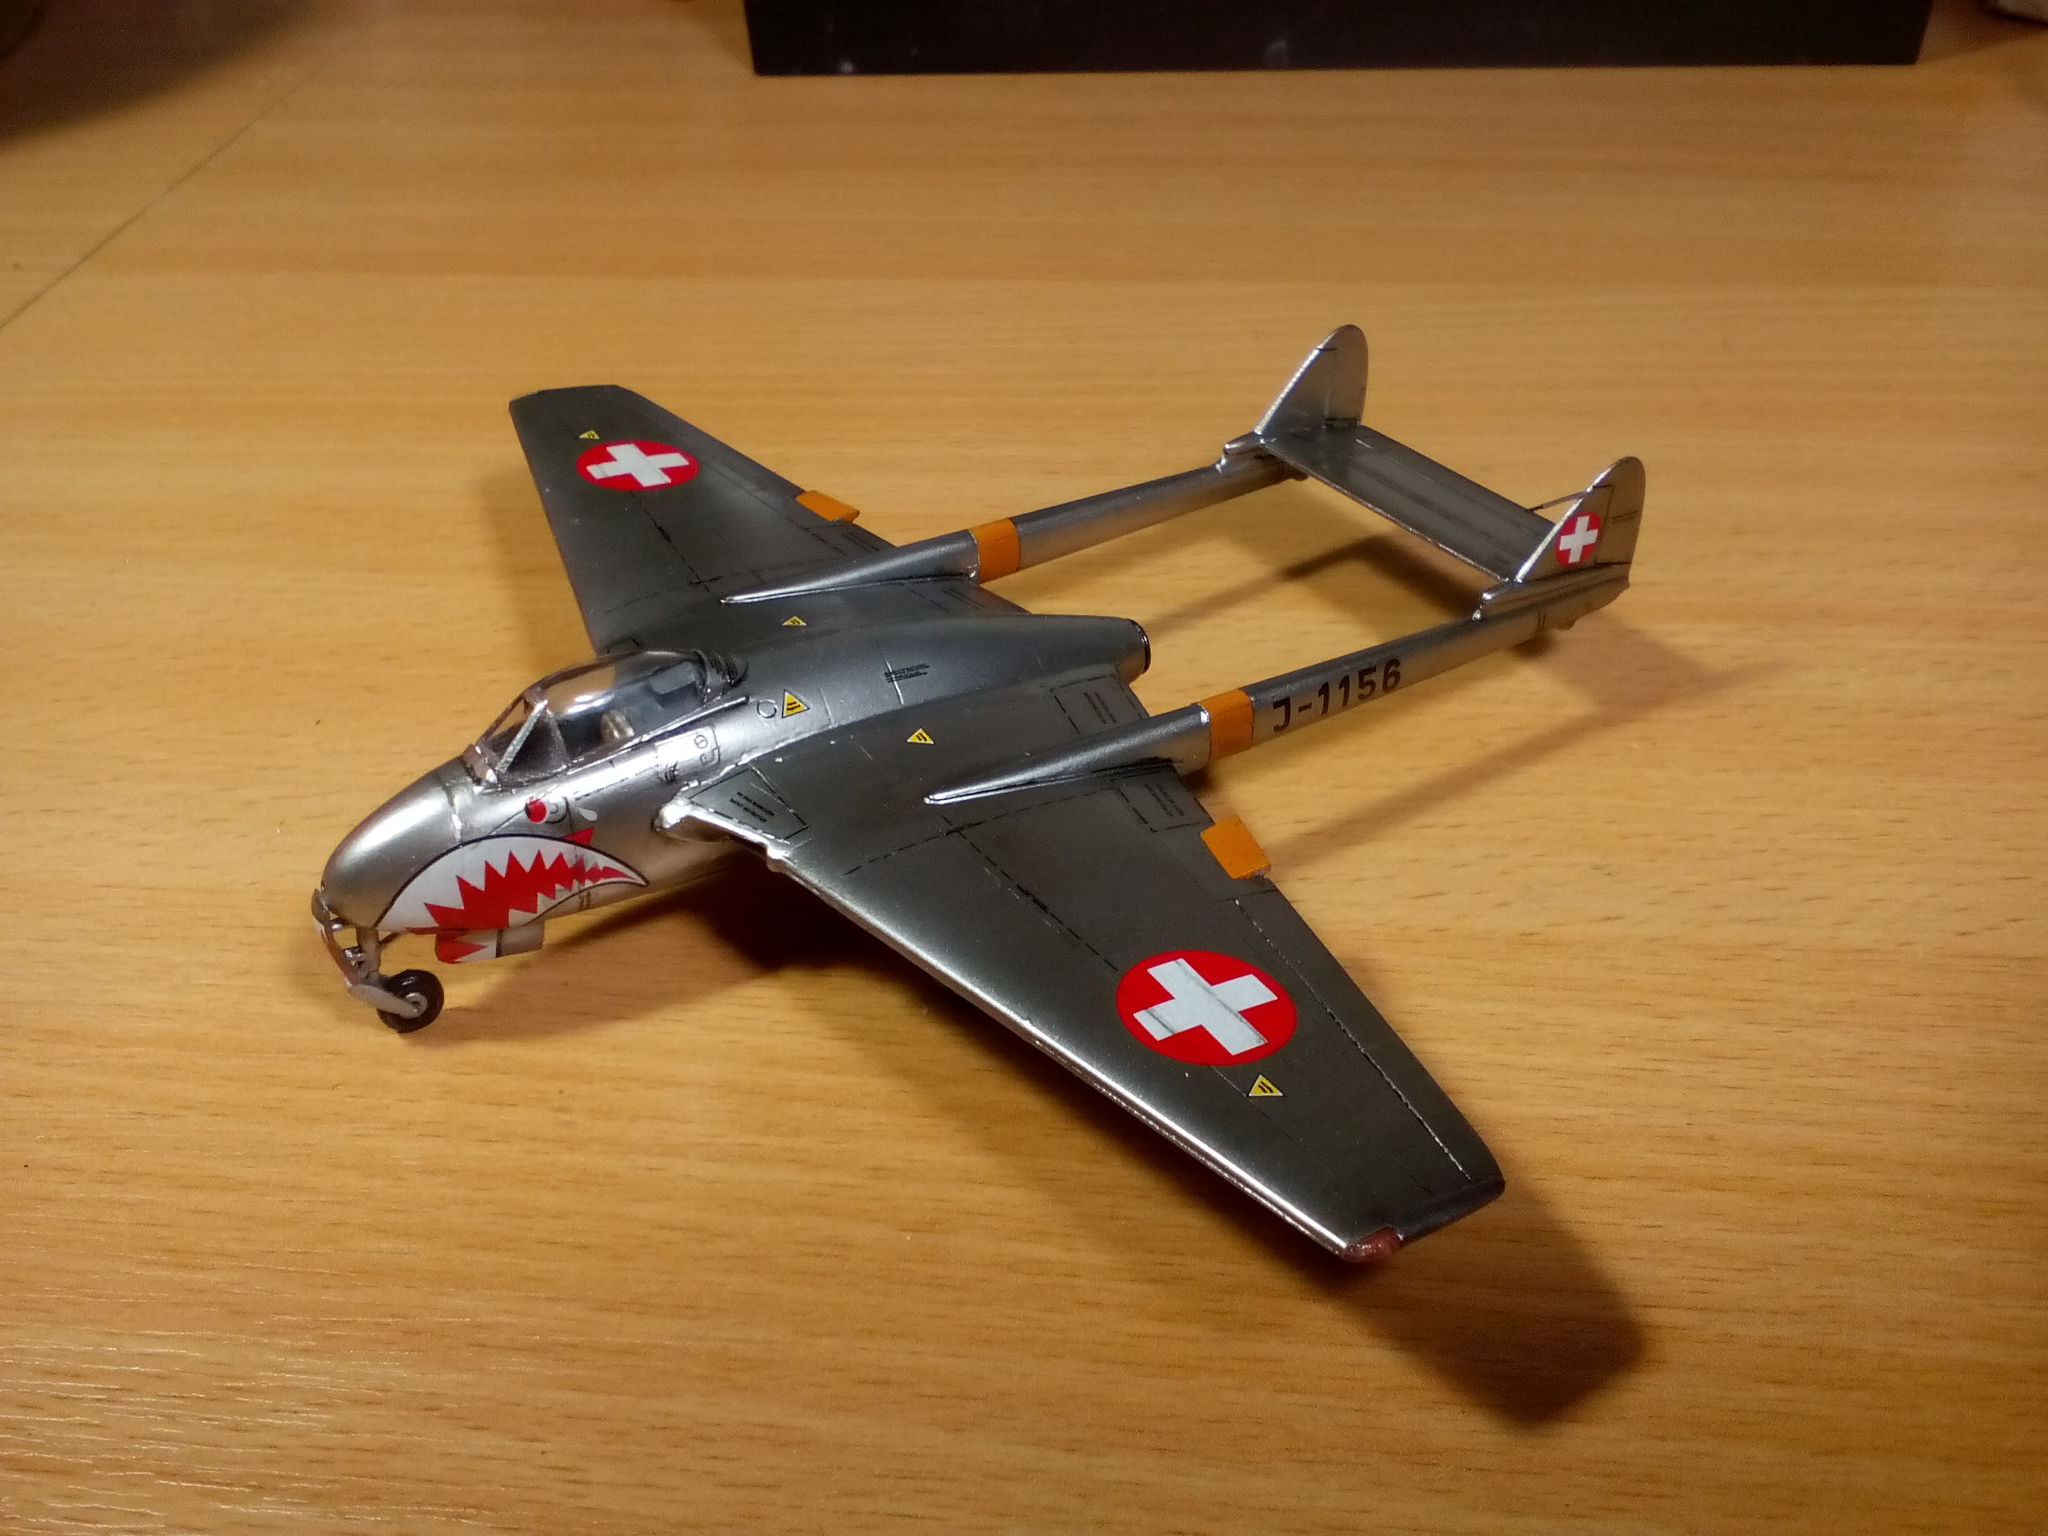 De Havilland DH.100 Vampire FB.Mk.6, Amodel, 1/72. - My, Stand modeling, Prefabricated model, Assembly, Painting, Airbrushing, Needlework with process, Hobby, With your own hands, , Aviation, Airplane, Longpost